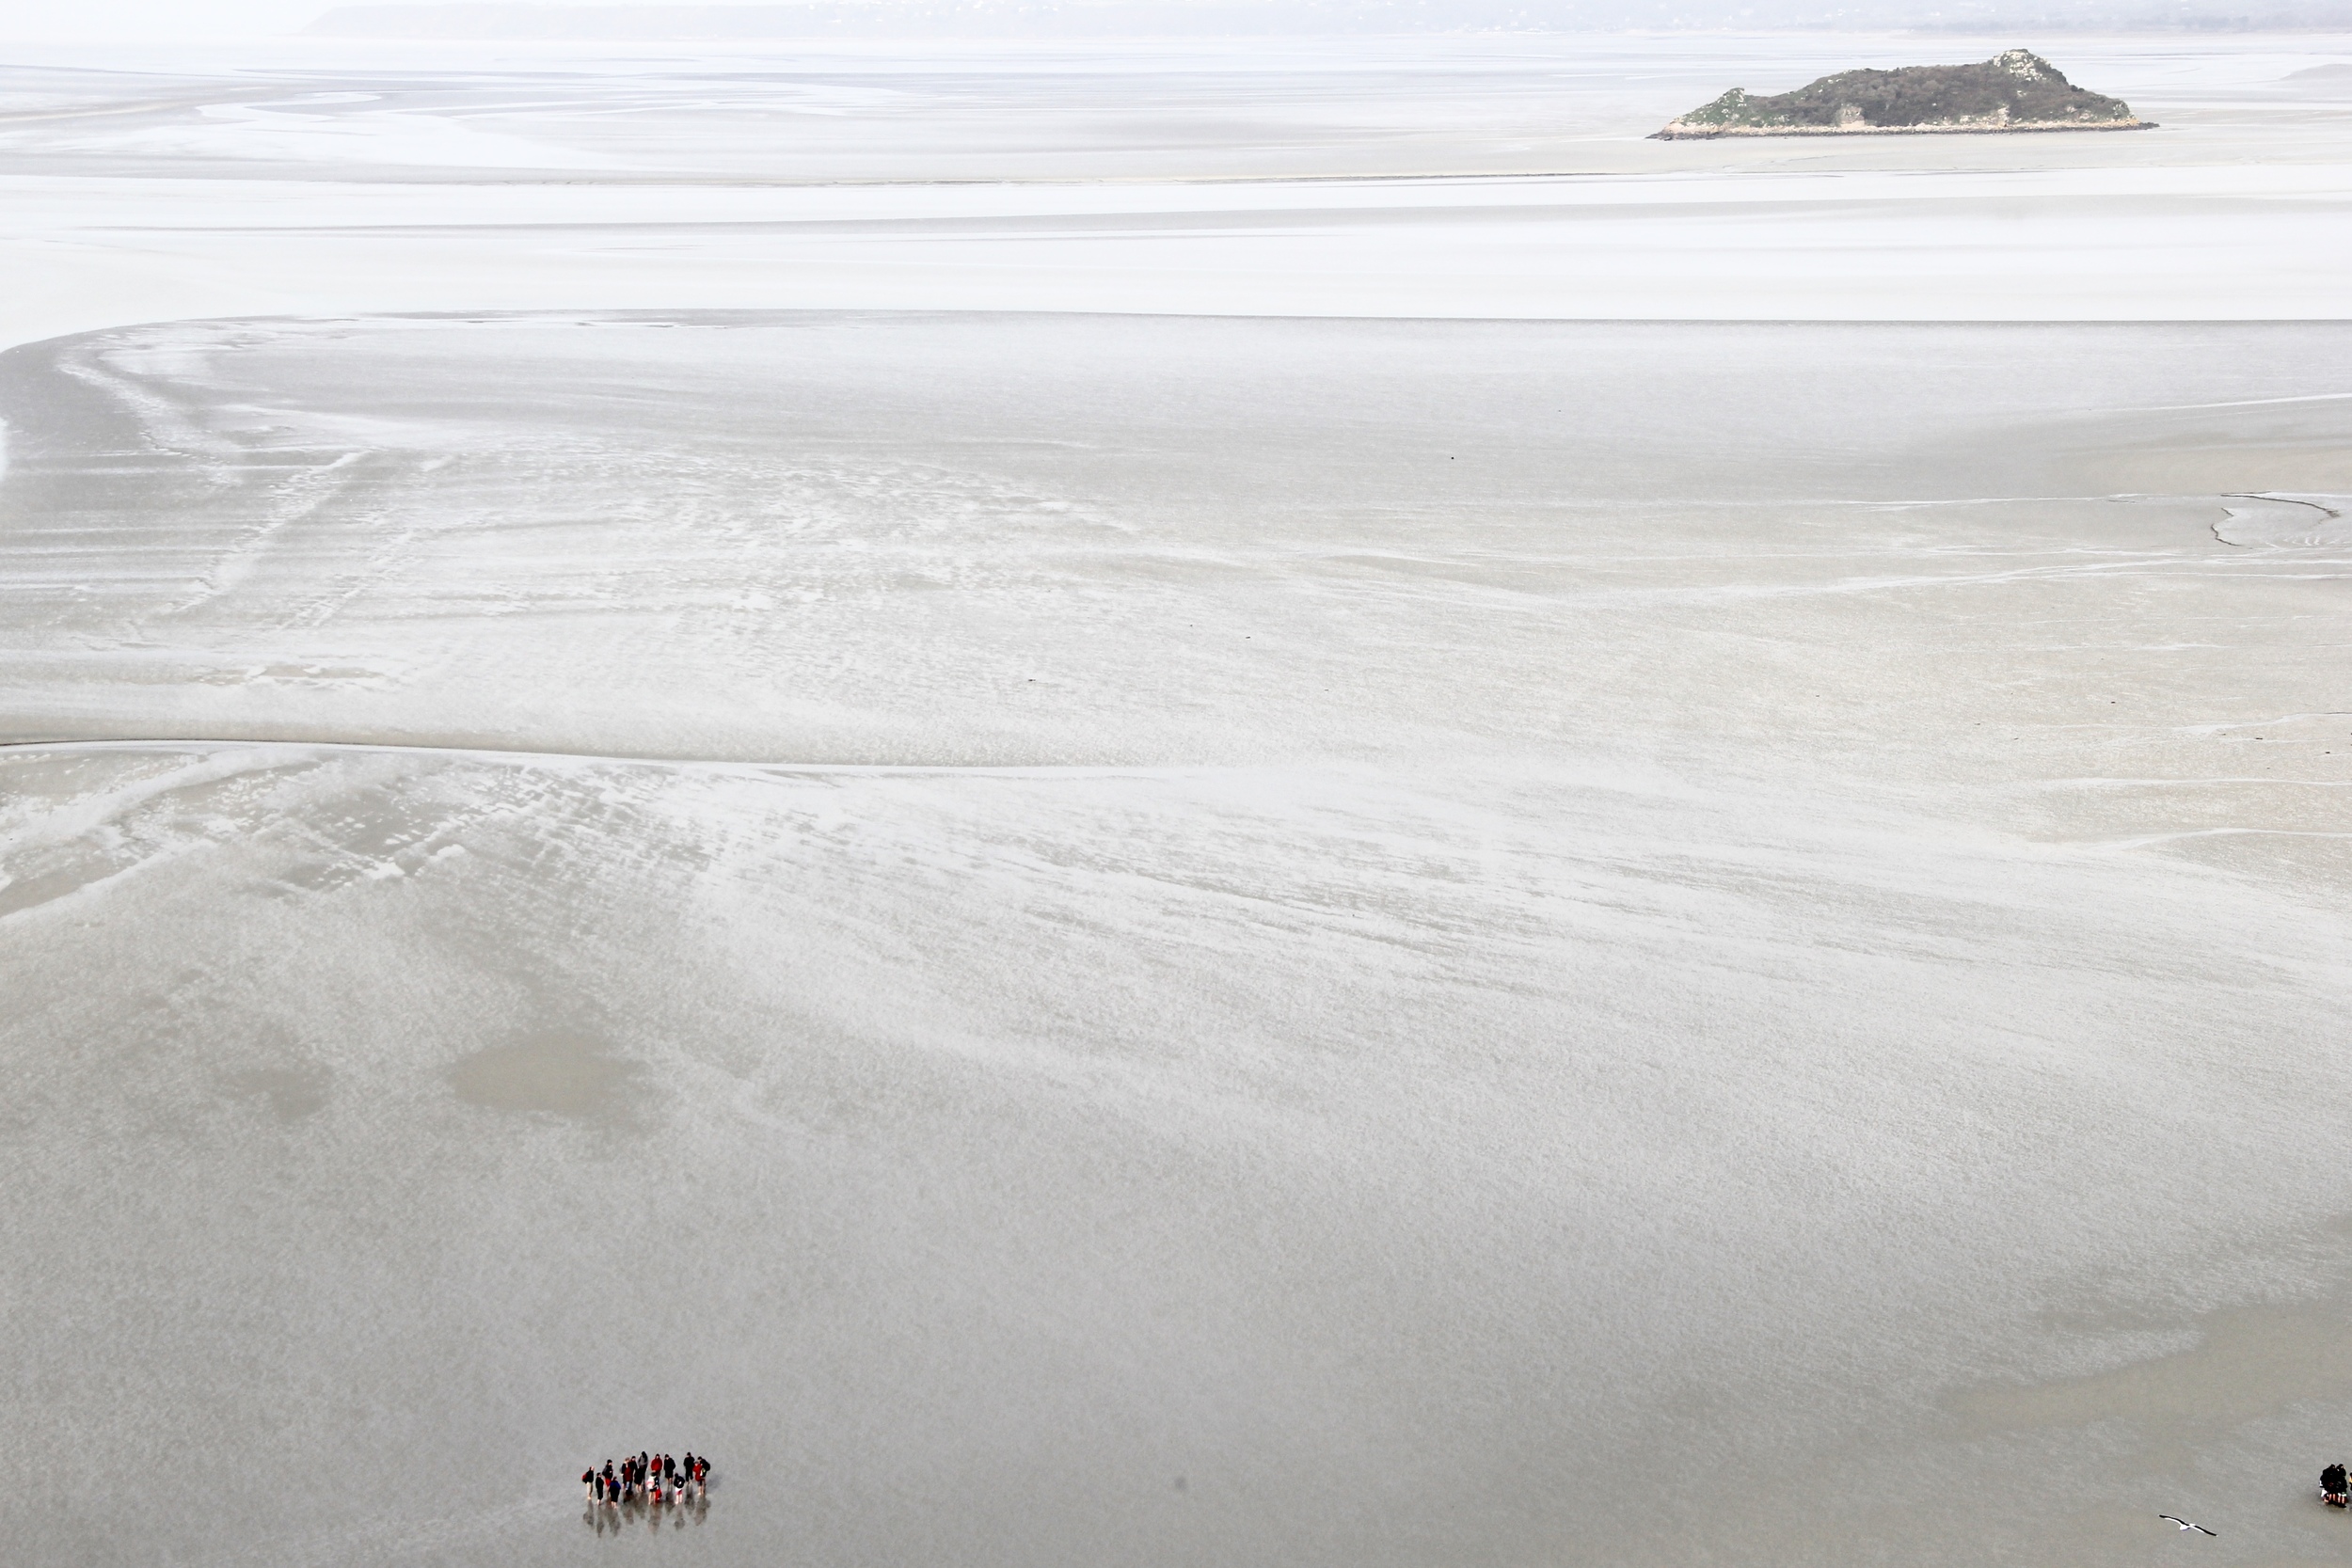 School groups on the tide flats | Mont St Michel